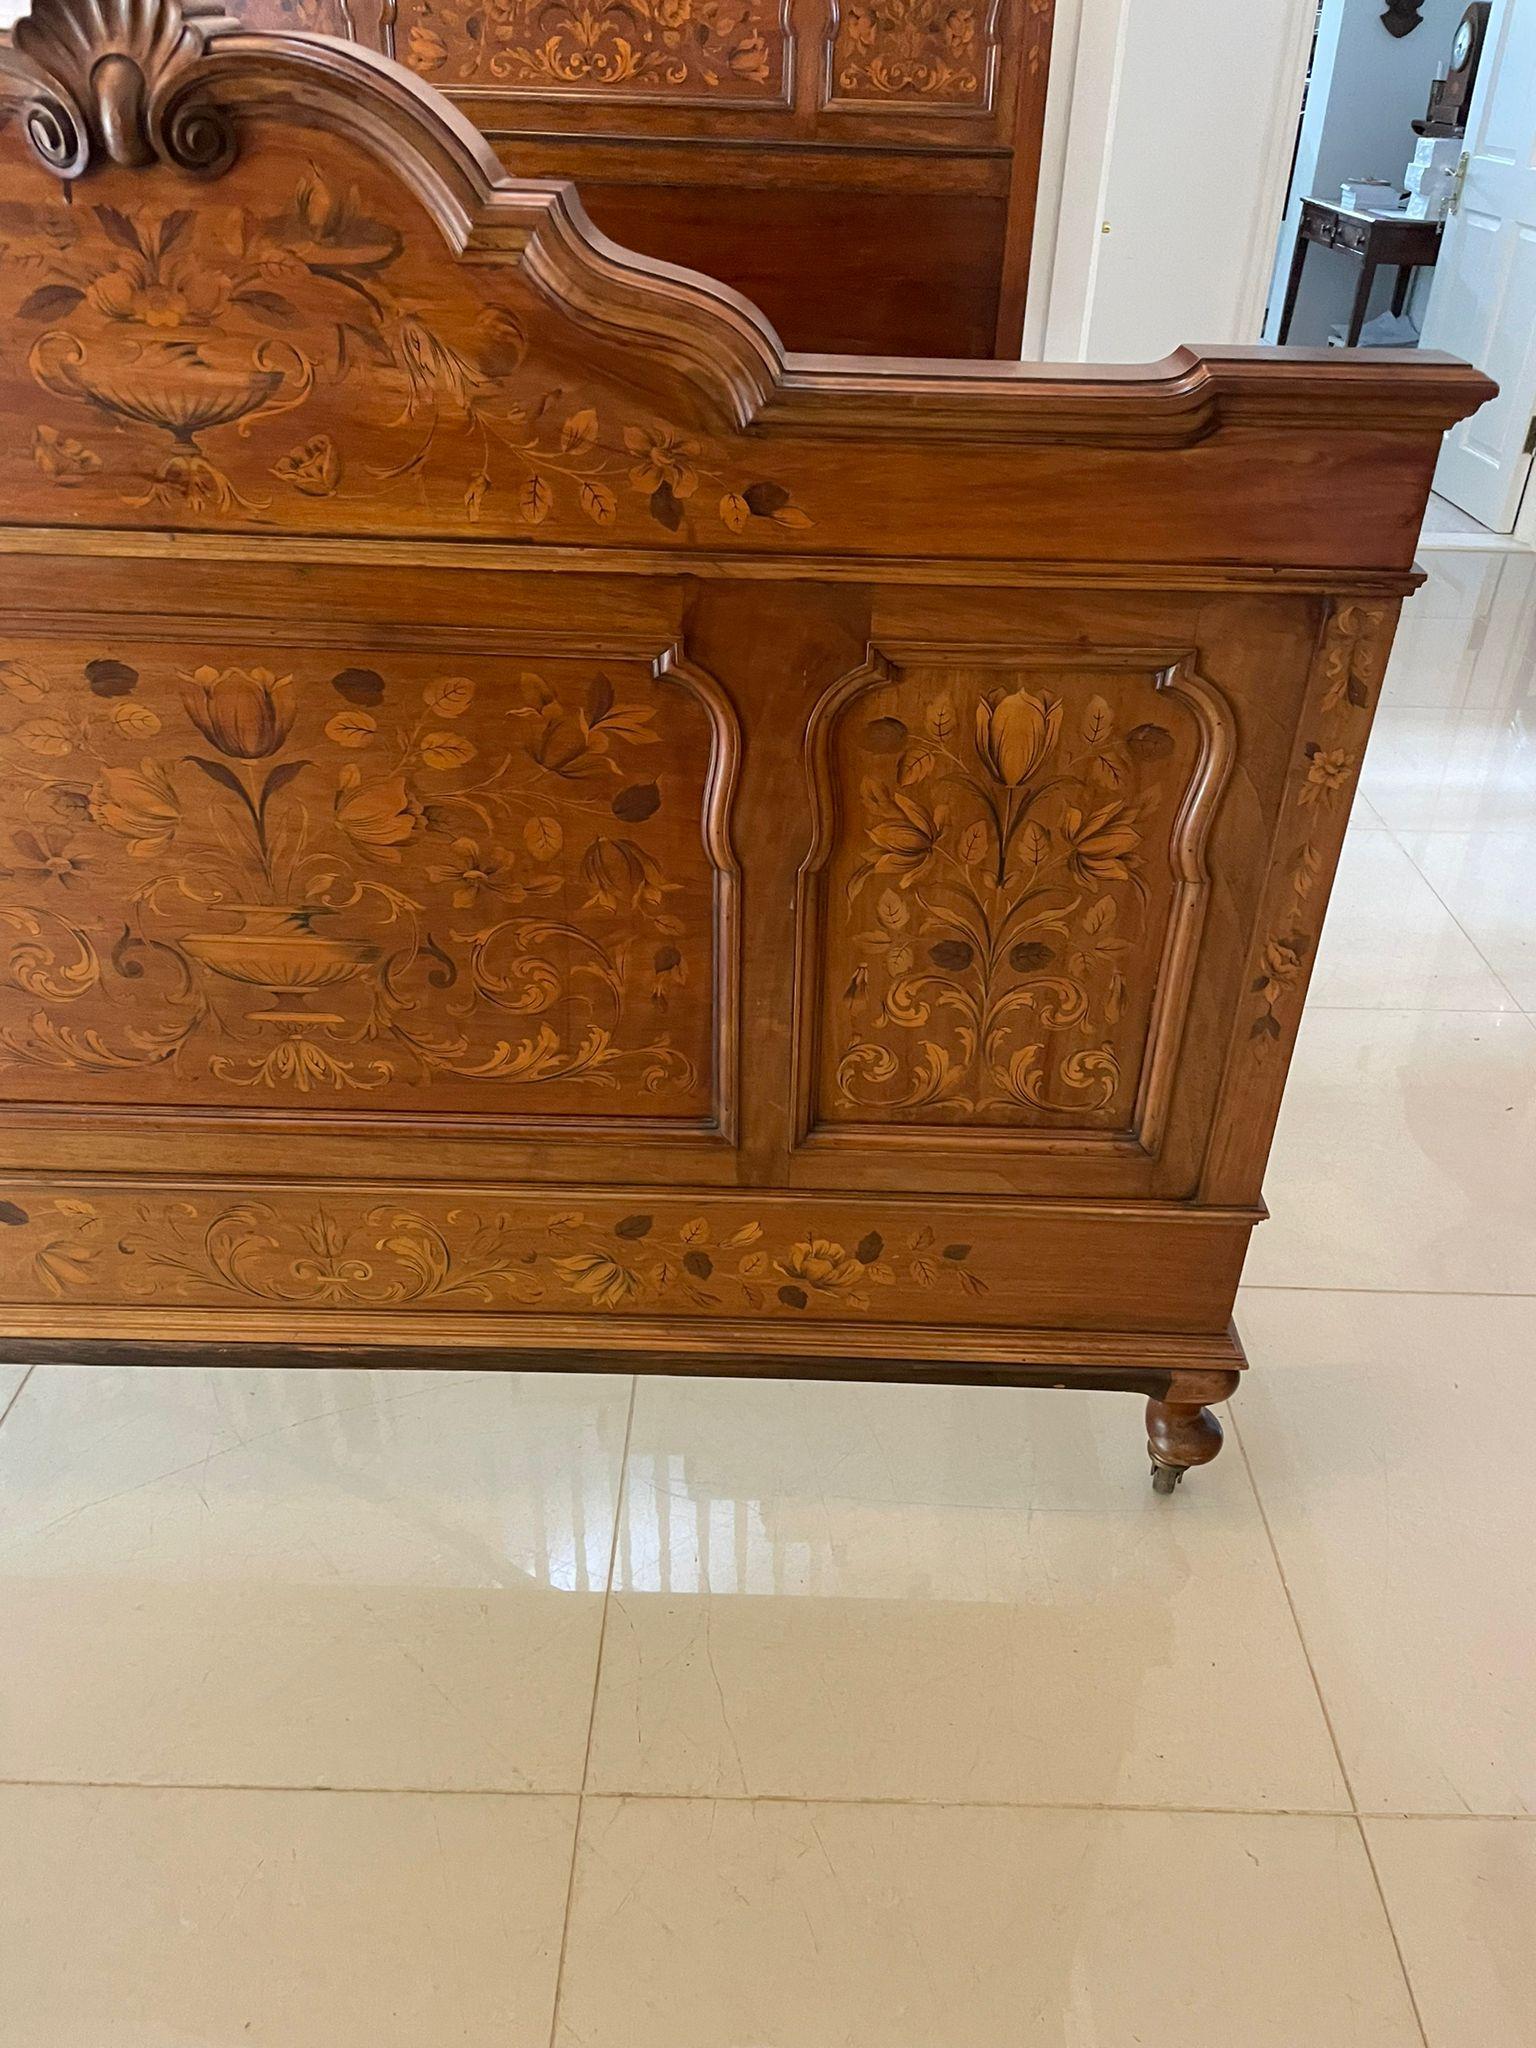 Outstanding Quality King Size Antique Figured Walnut Floral Marquetry Inlaid Bed In Good Condition For Sale In Suffolk, GB